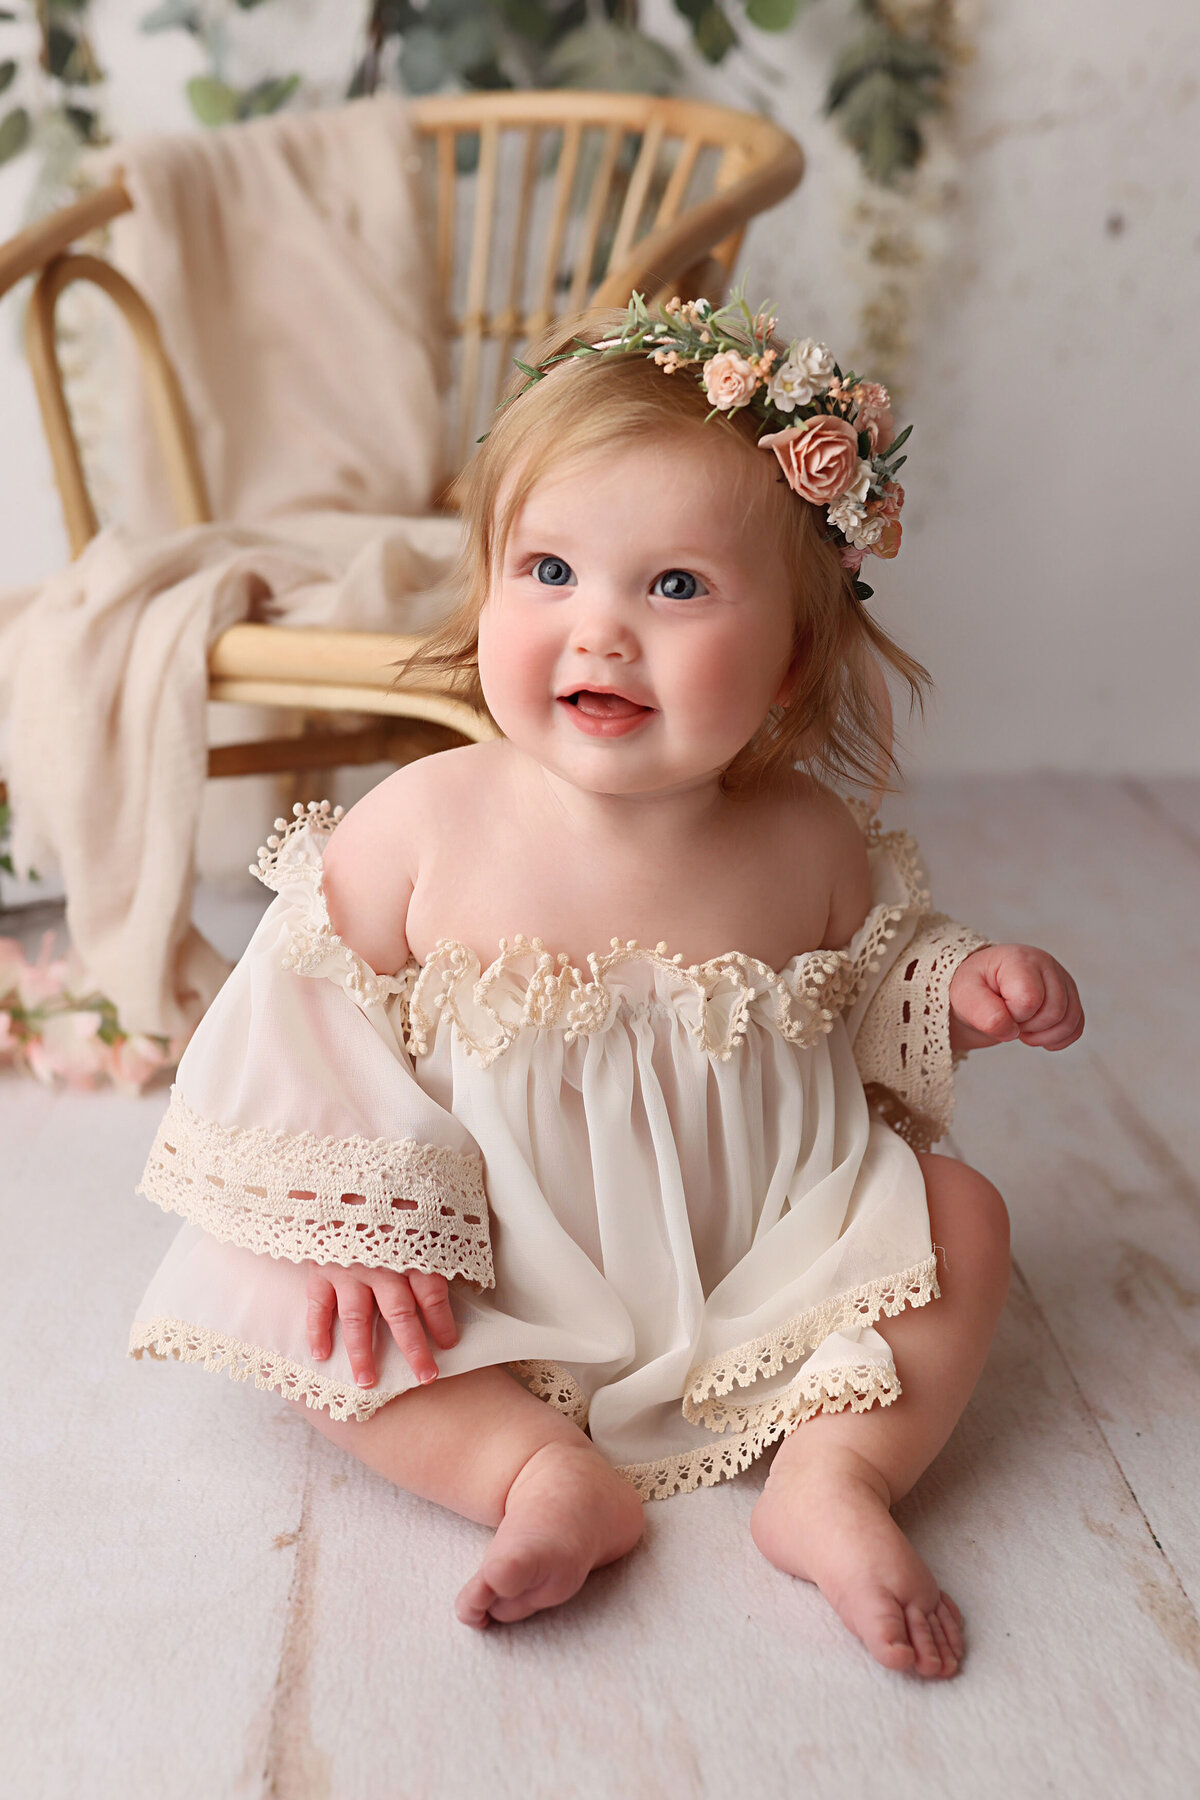 sweet baby during her NJ birthday photo session wearing a cream dress